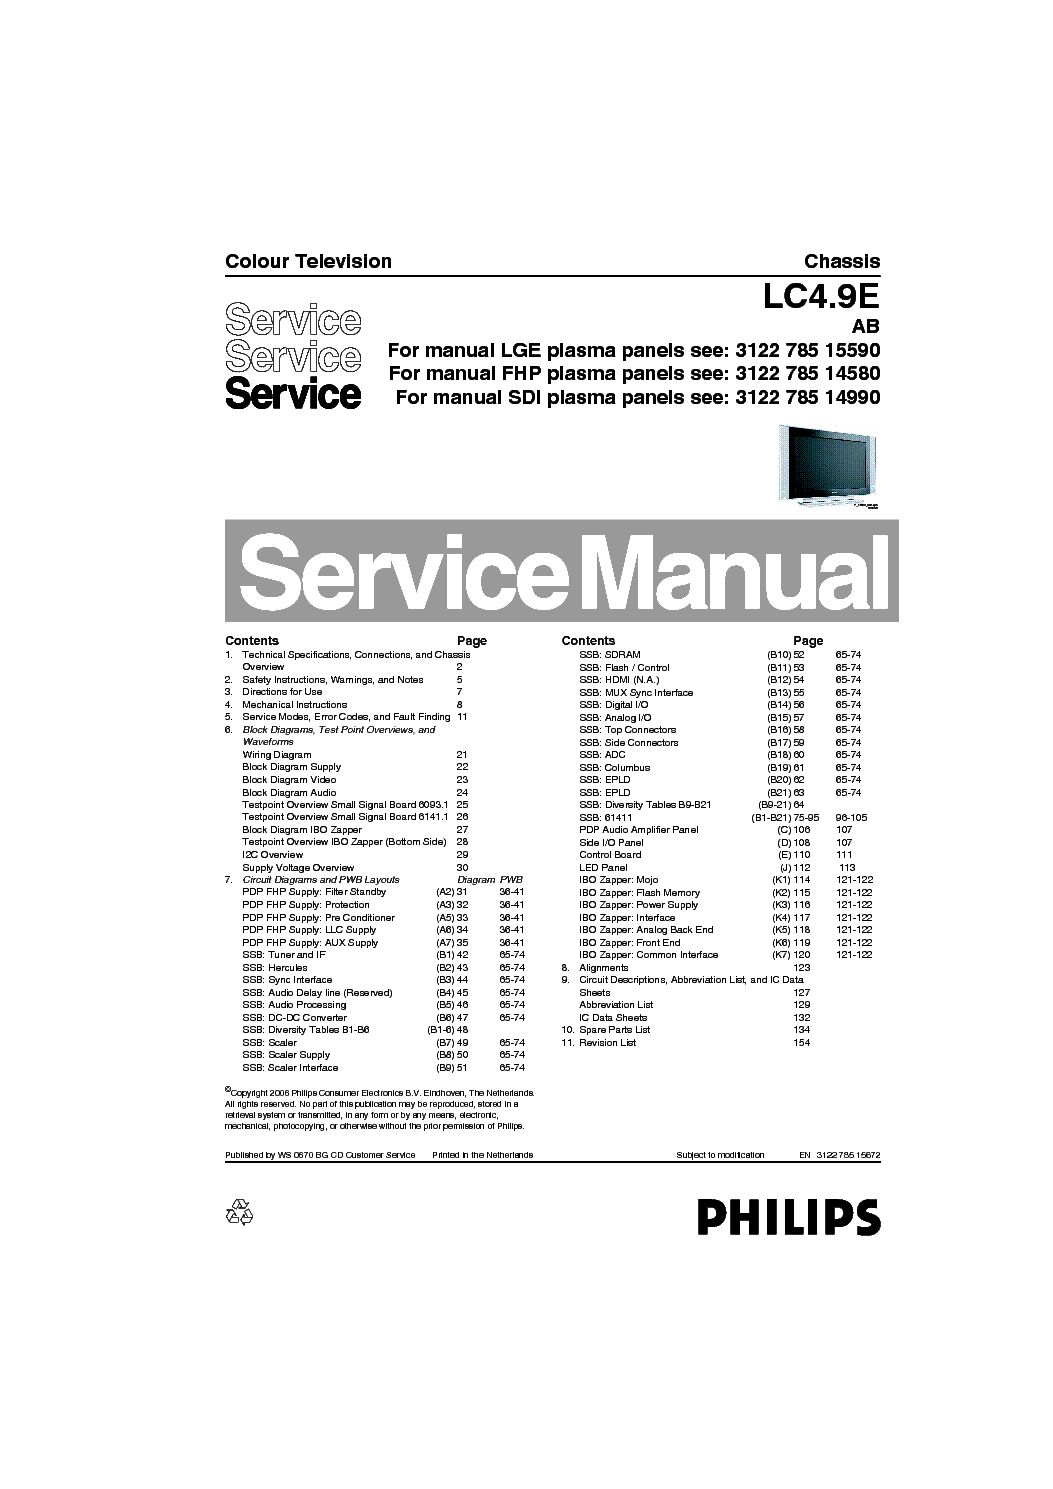 PHILIPS CHASSIS LC4.9E AB service manual (1st page)